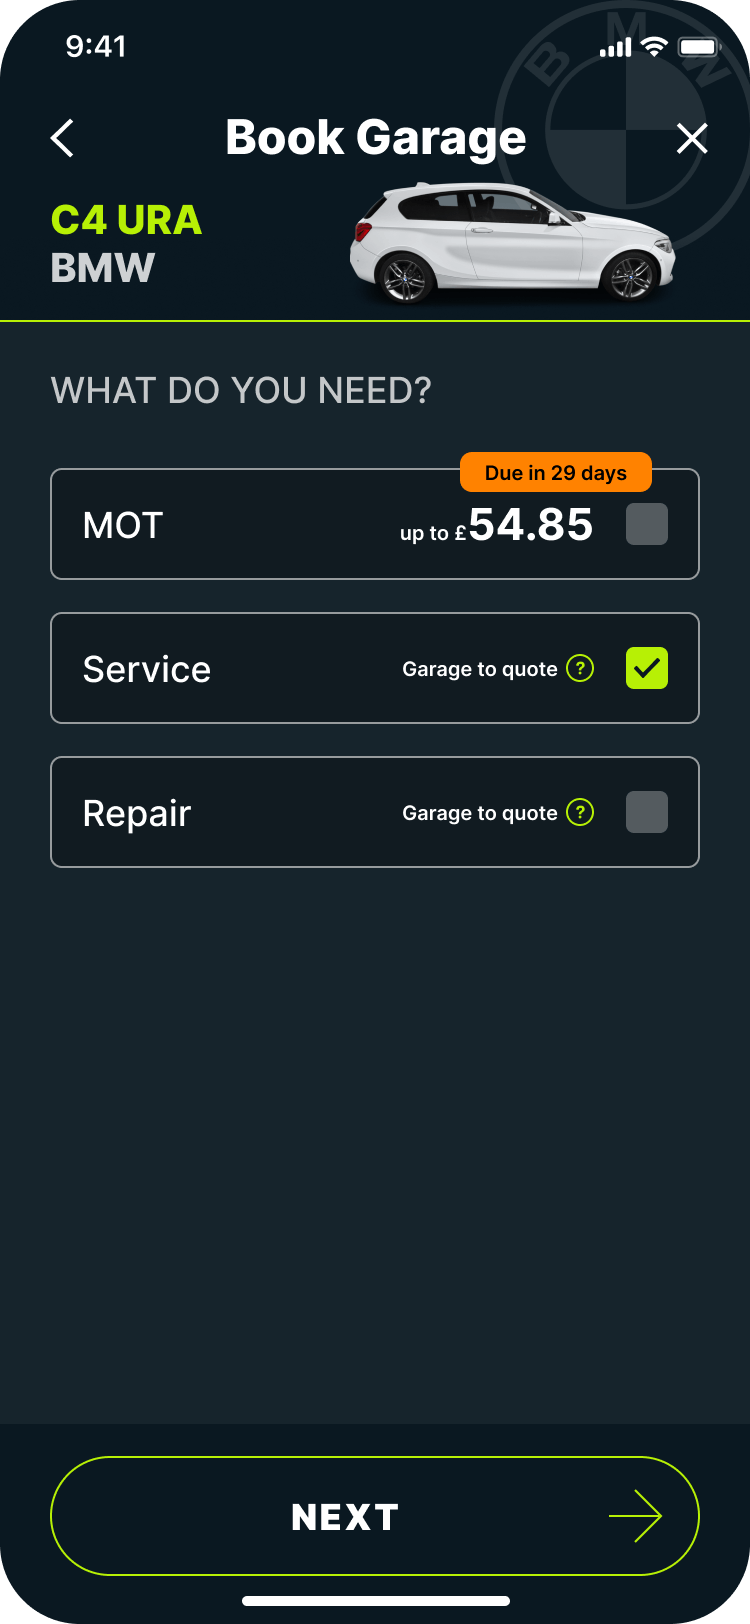 Caura Book Garage screen showing option for user to choose whether they want an MOT, car repair or service